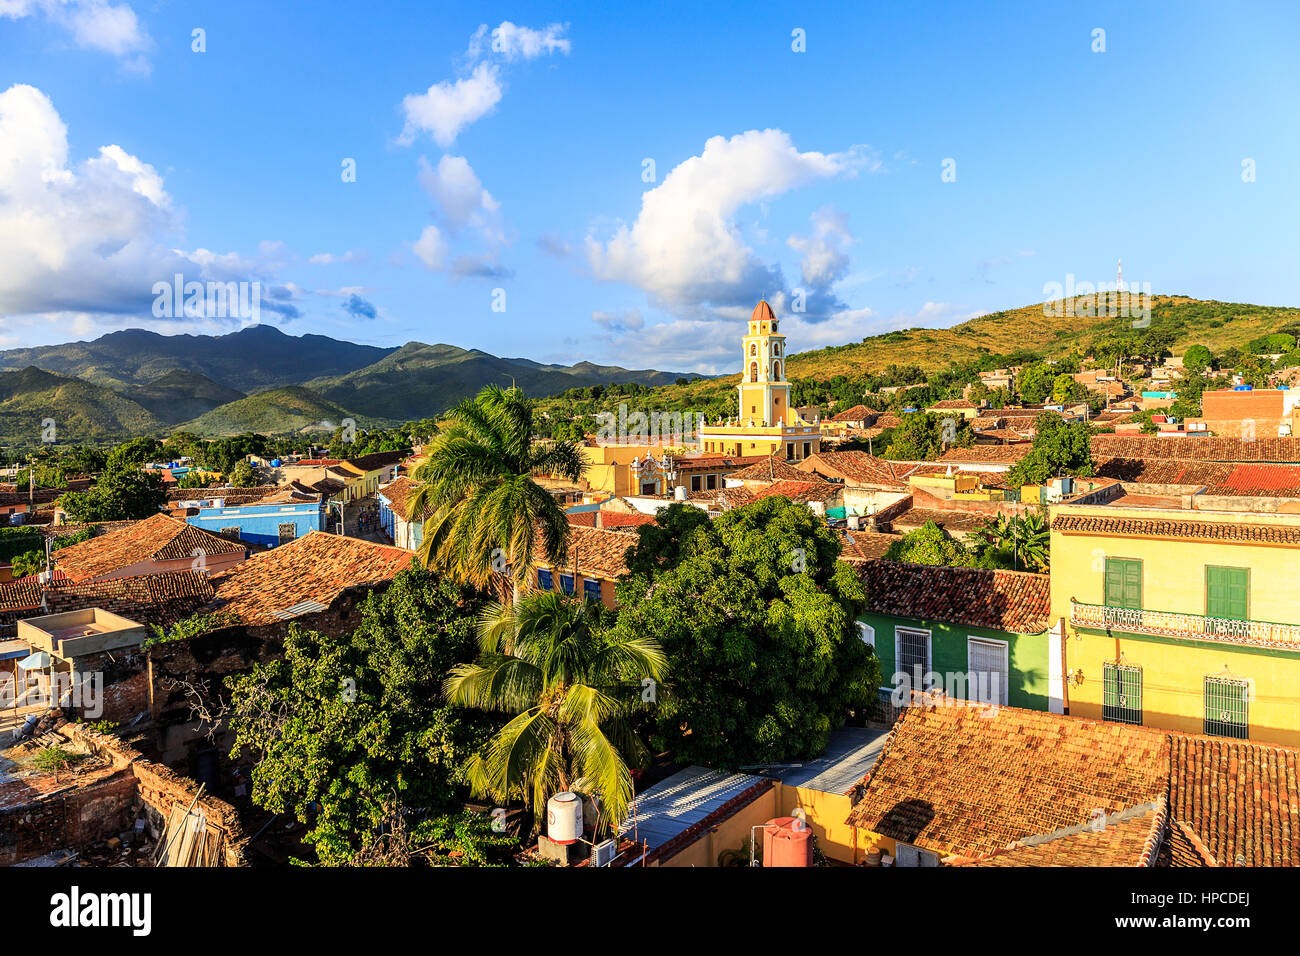 A typical street scene in Trinidad, Cuba Stock Photo